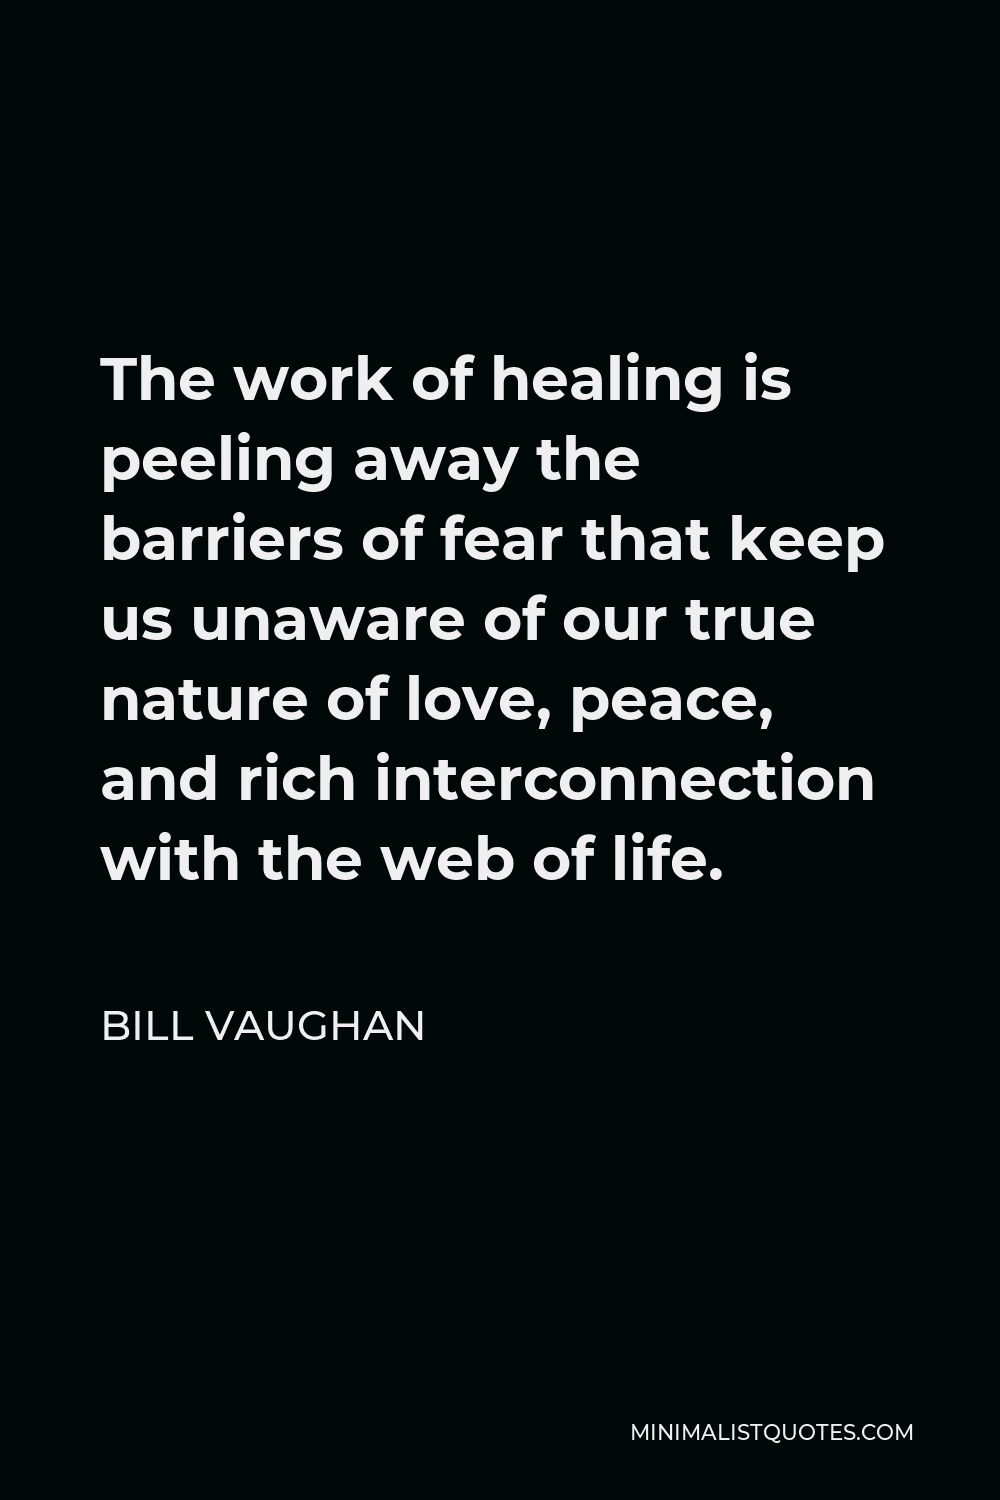 Bill Vaughan Quote - The work of healing is peeling away the barriers of fear that keep us unaware of our true nature of love, peace, and rich interconnection with the web of life.